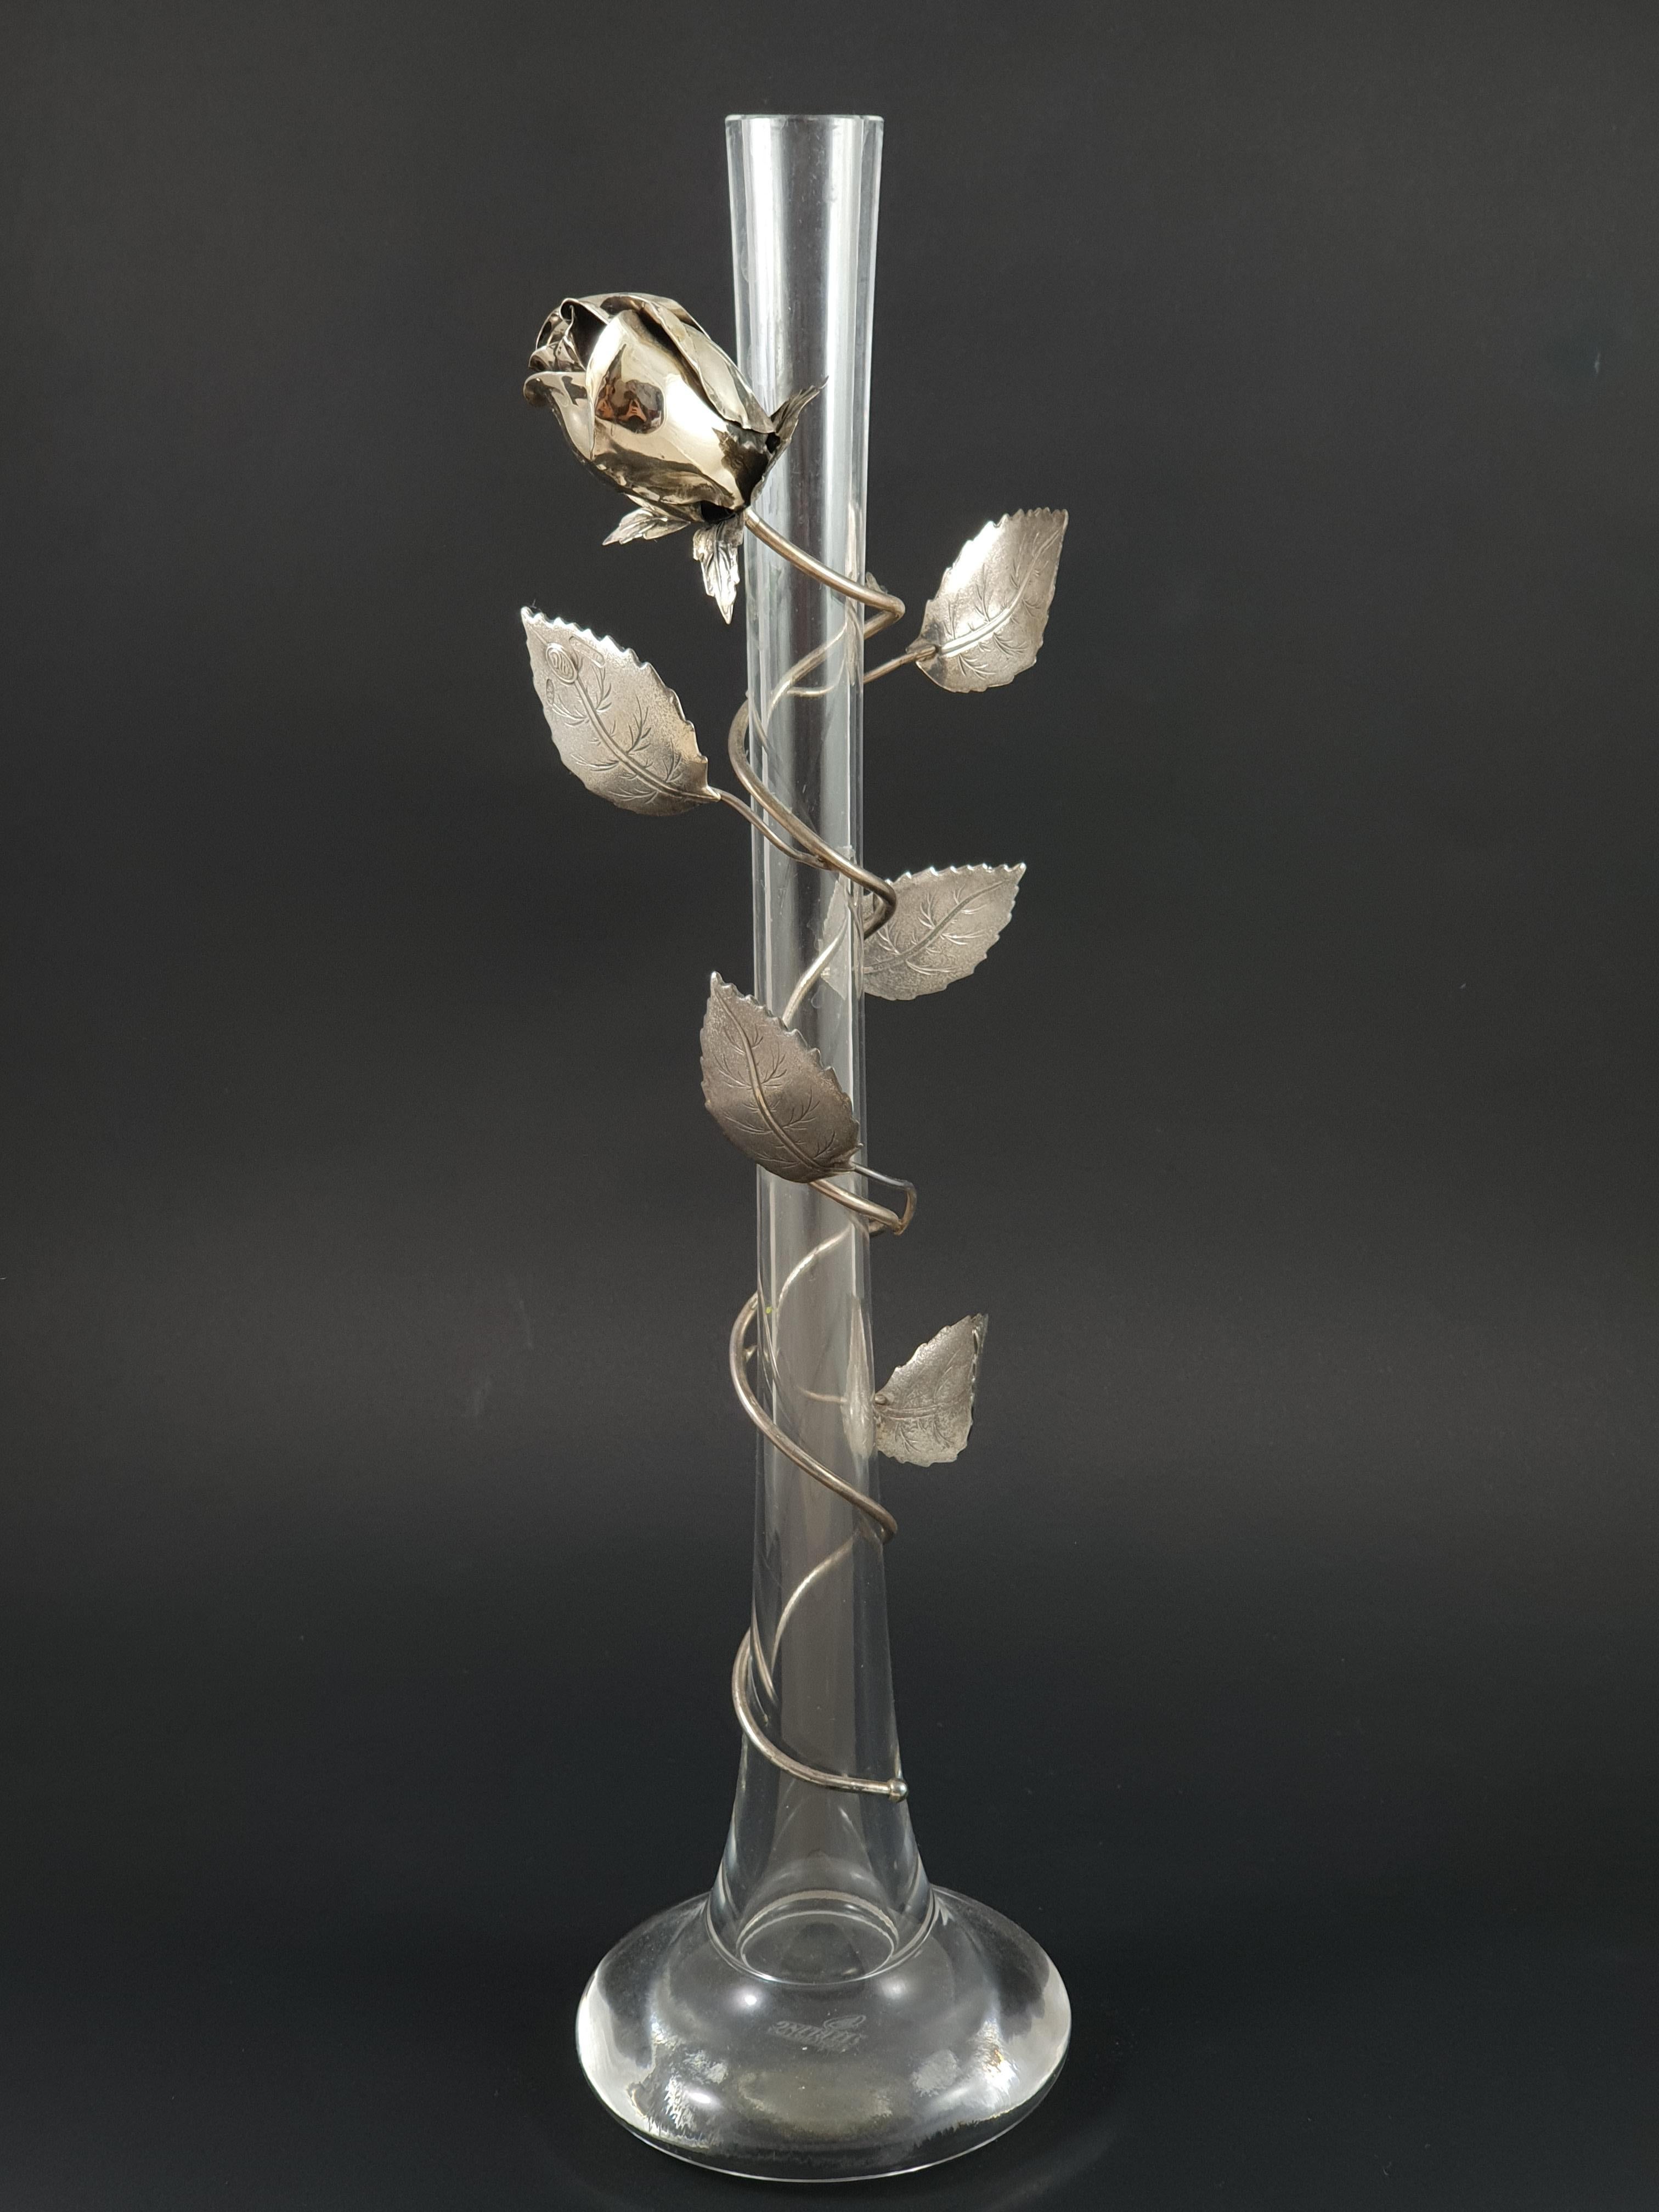 20th Italian Sterling Silver and Glass vase 

Decorated of a rose 

Height: 32.5 cm 
925 silver hallmark

Great condition